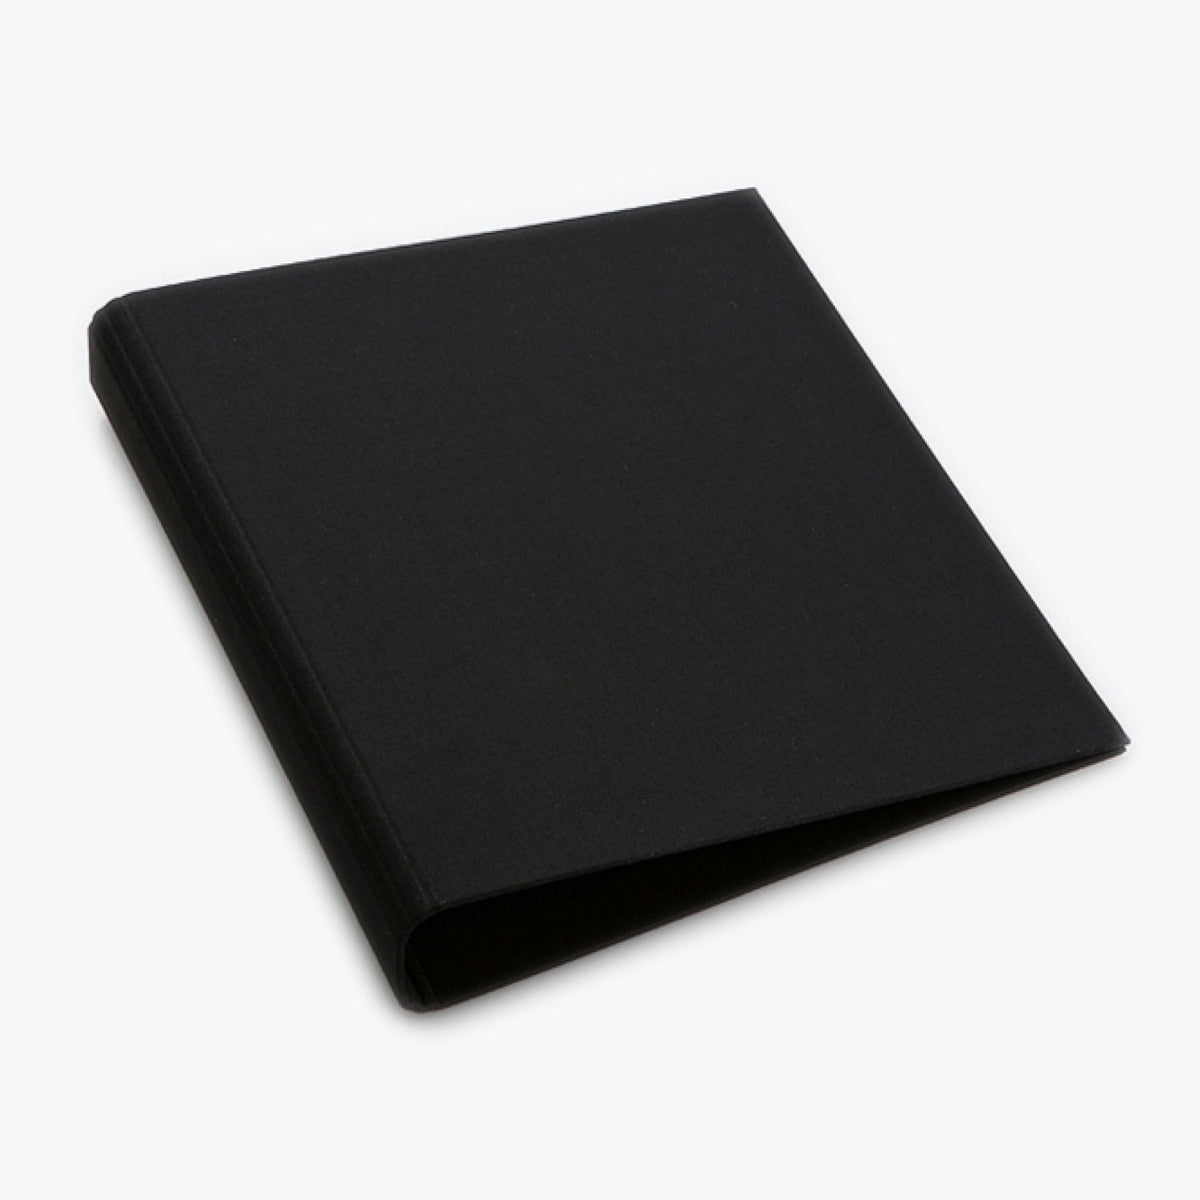 Bookbinders Design - Cloth Ringbinder - A3 - Black <Outgoing>